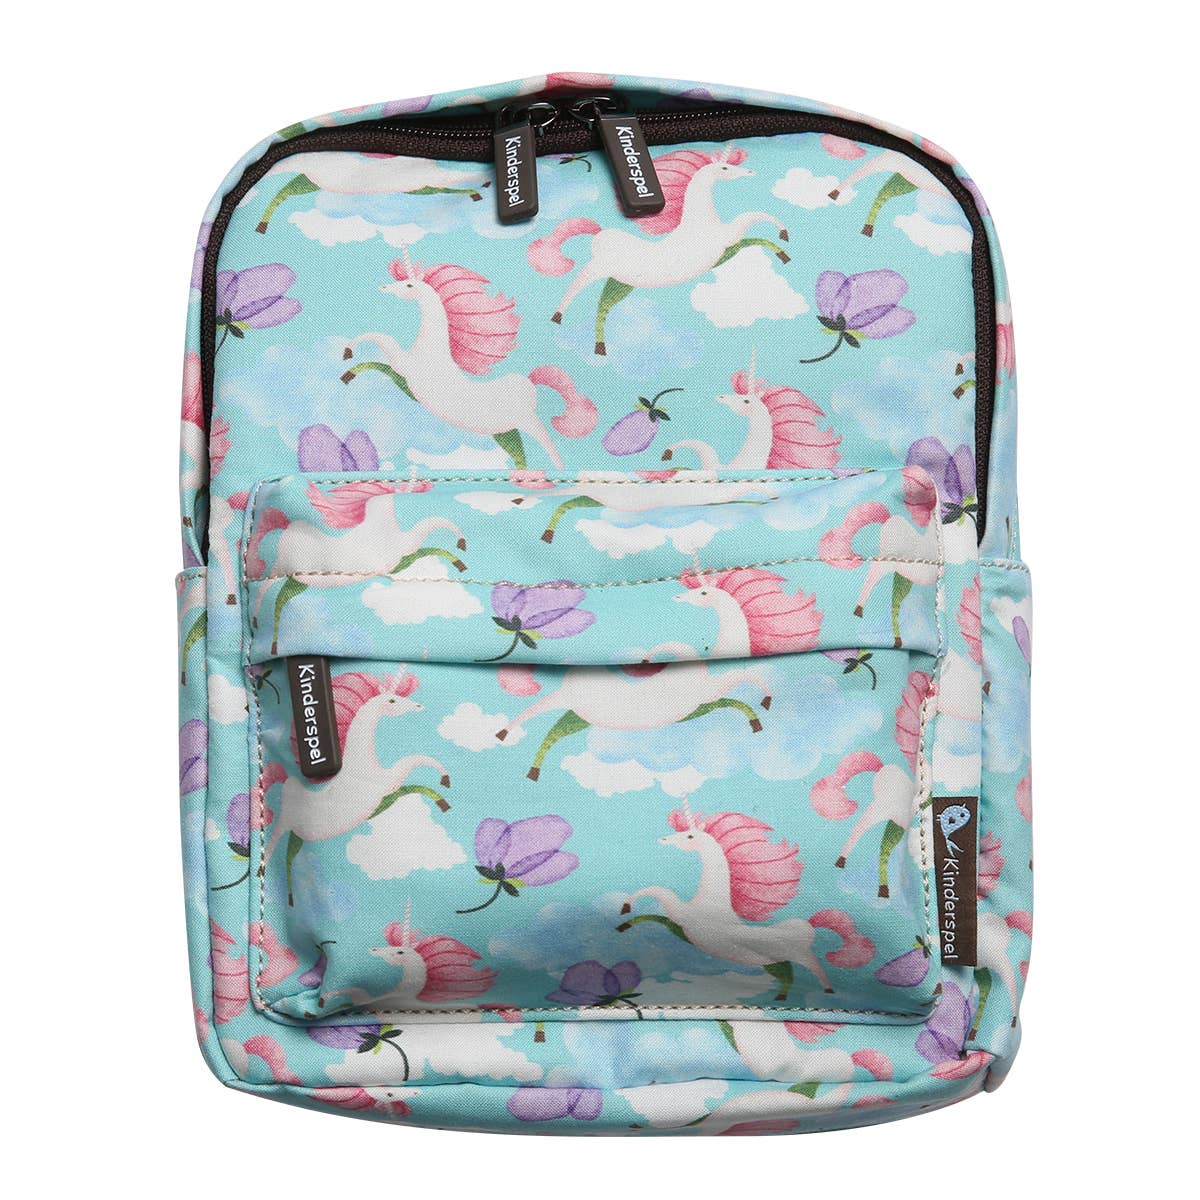 Kinderspel All-in-One Insulated Toddler Backpack with Tether - Unicorn Kinderspel All-in-One Insulated Toddler Backpack with Tether - Unicorn 